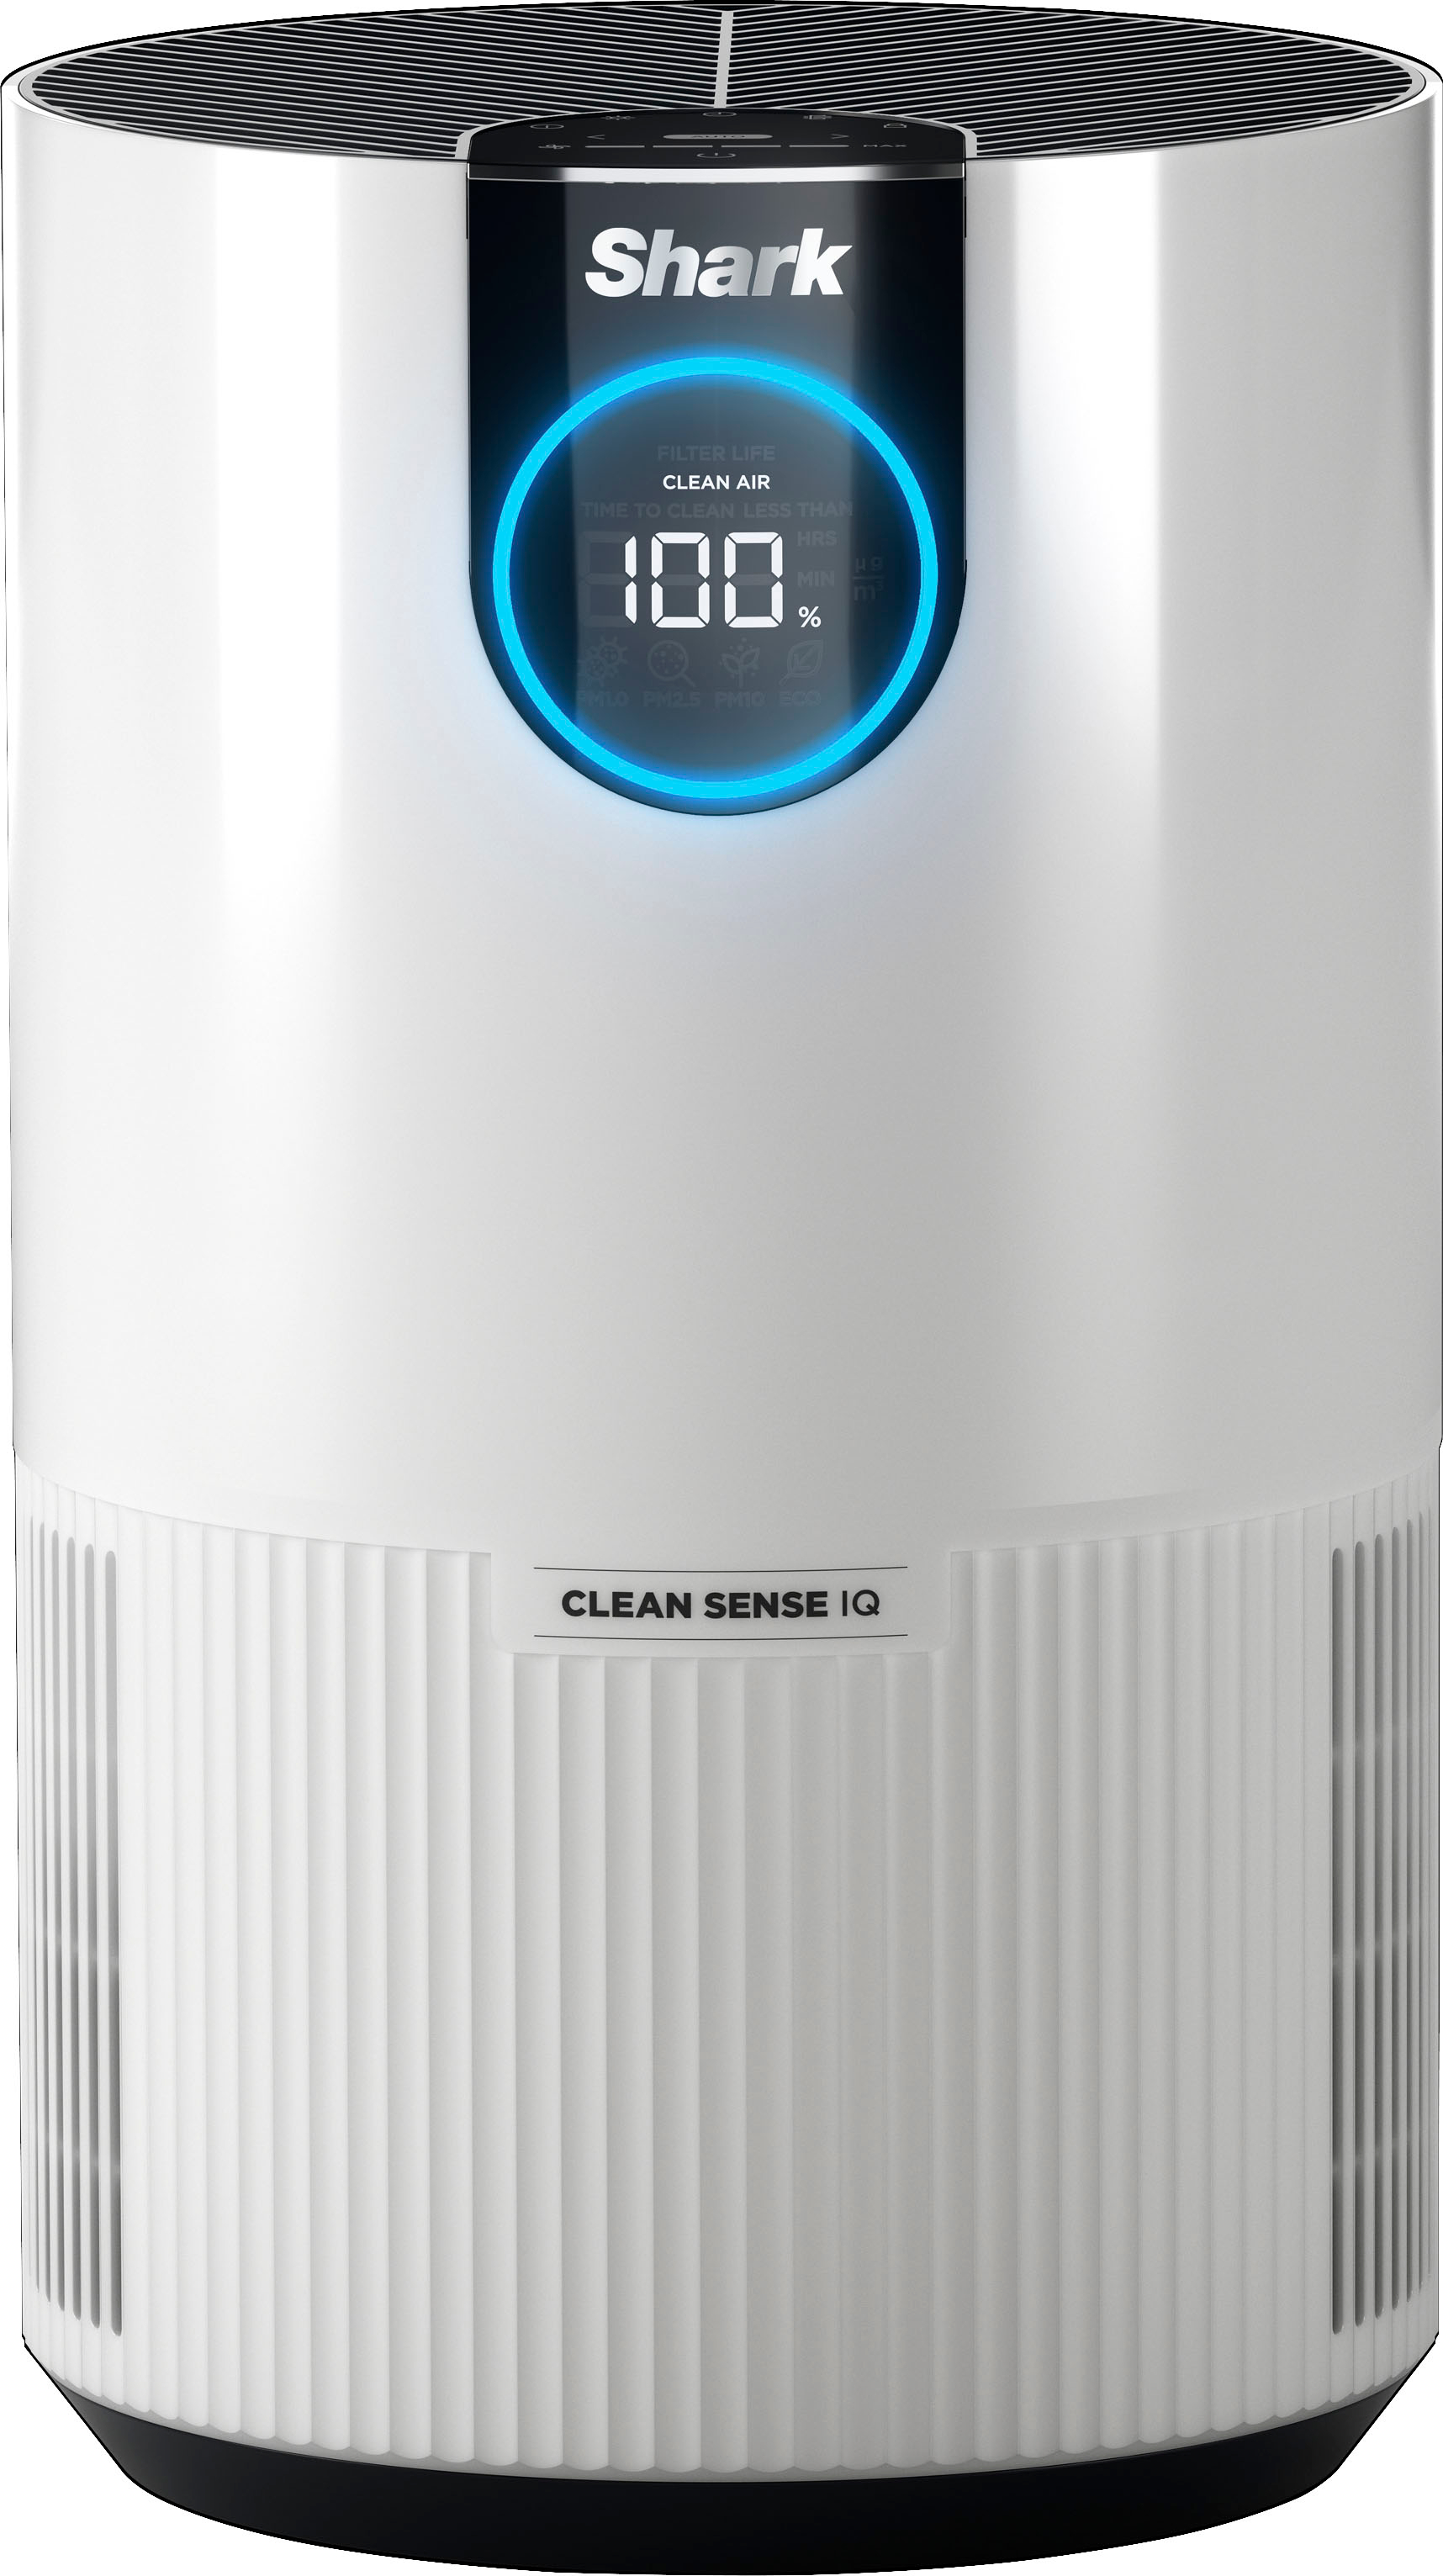 Shark Air Purifier with Nanoseal HEPA, Cleansense IQ, Odor Lock, Cleans up to 500 Sq. Ft White HP102 - Best Buy